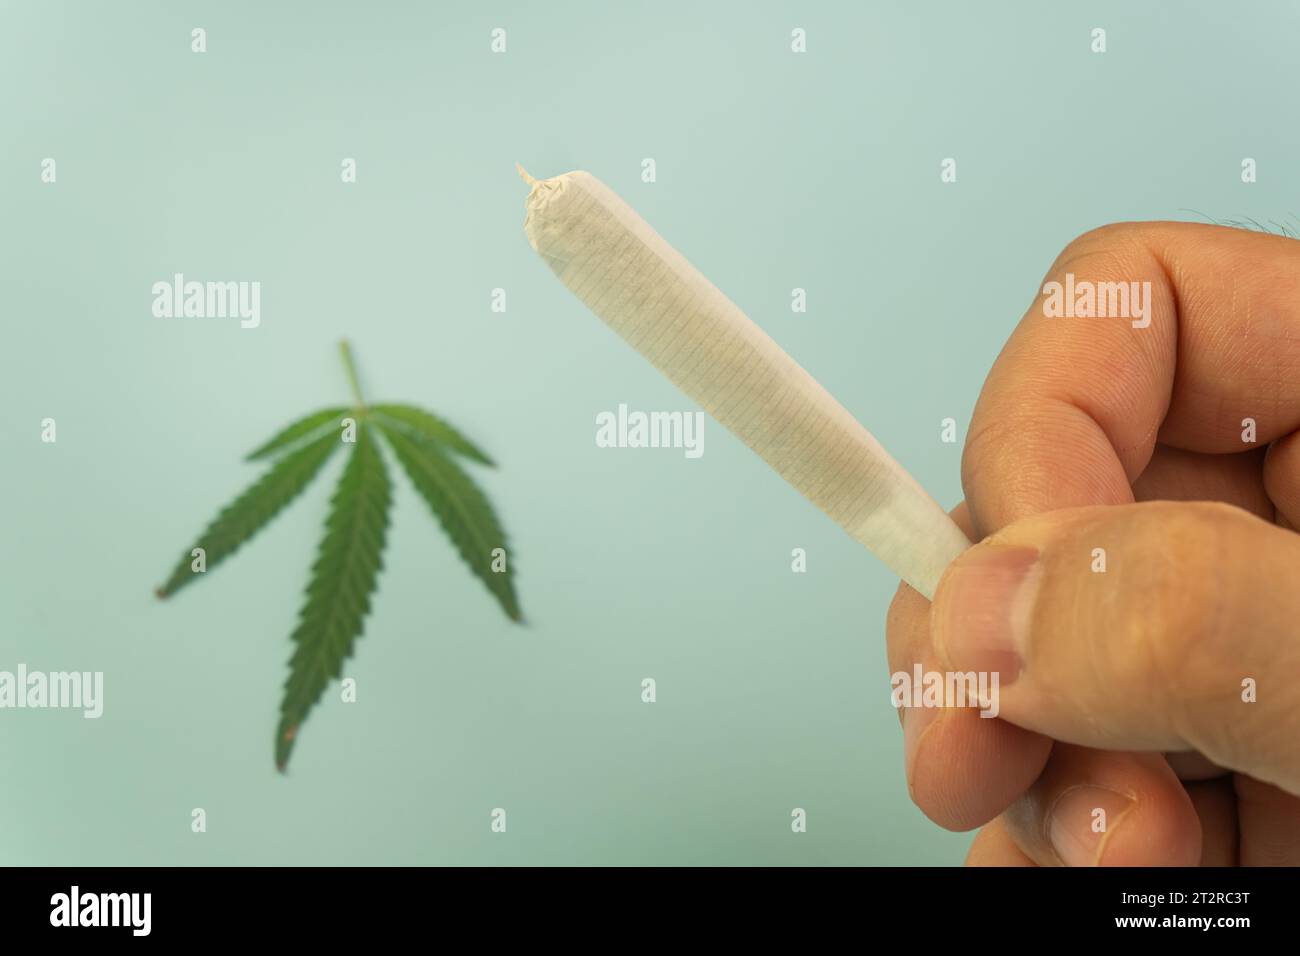 Cannabis joint in a man's hand on a blue background Close up. Pot use concept. Stock Photo